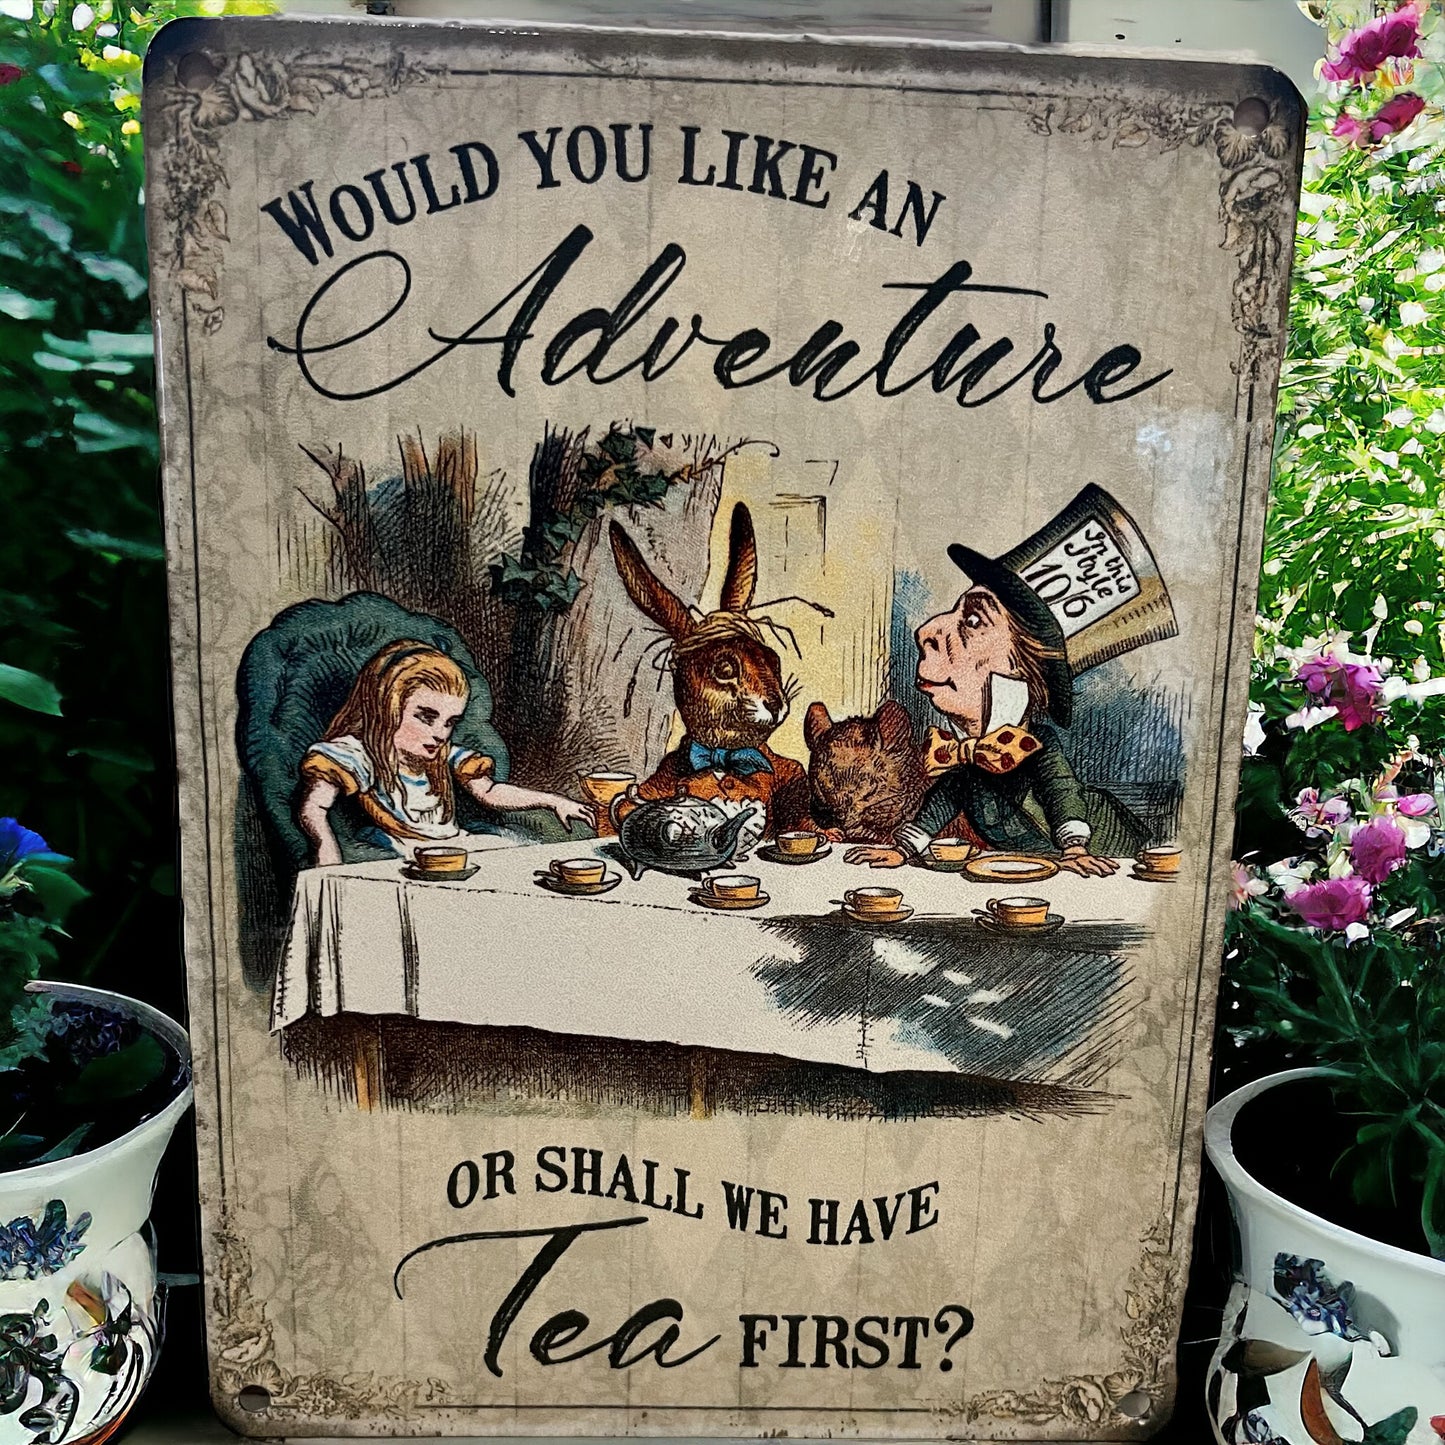 Alice in Wonderland Sign - Would you like an adventure or shall we have tea first?